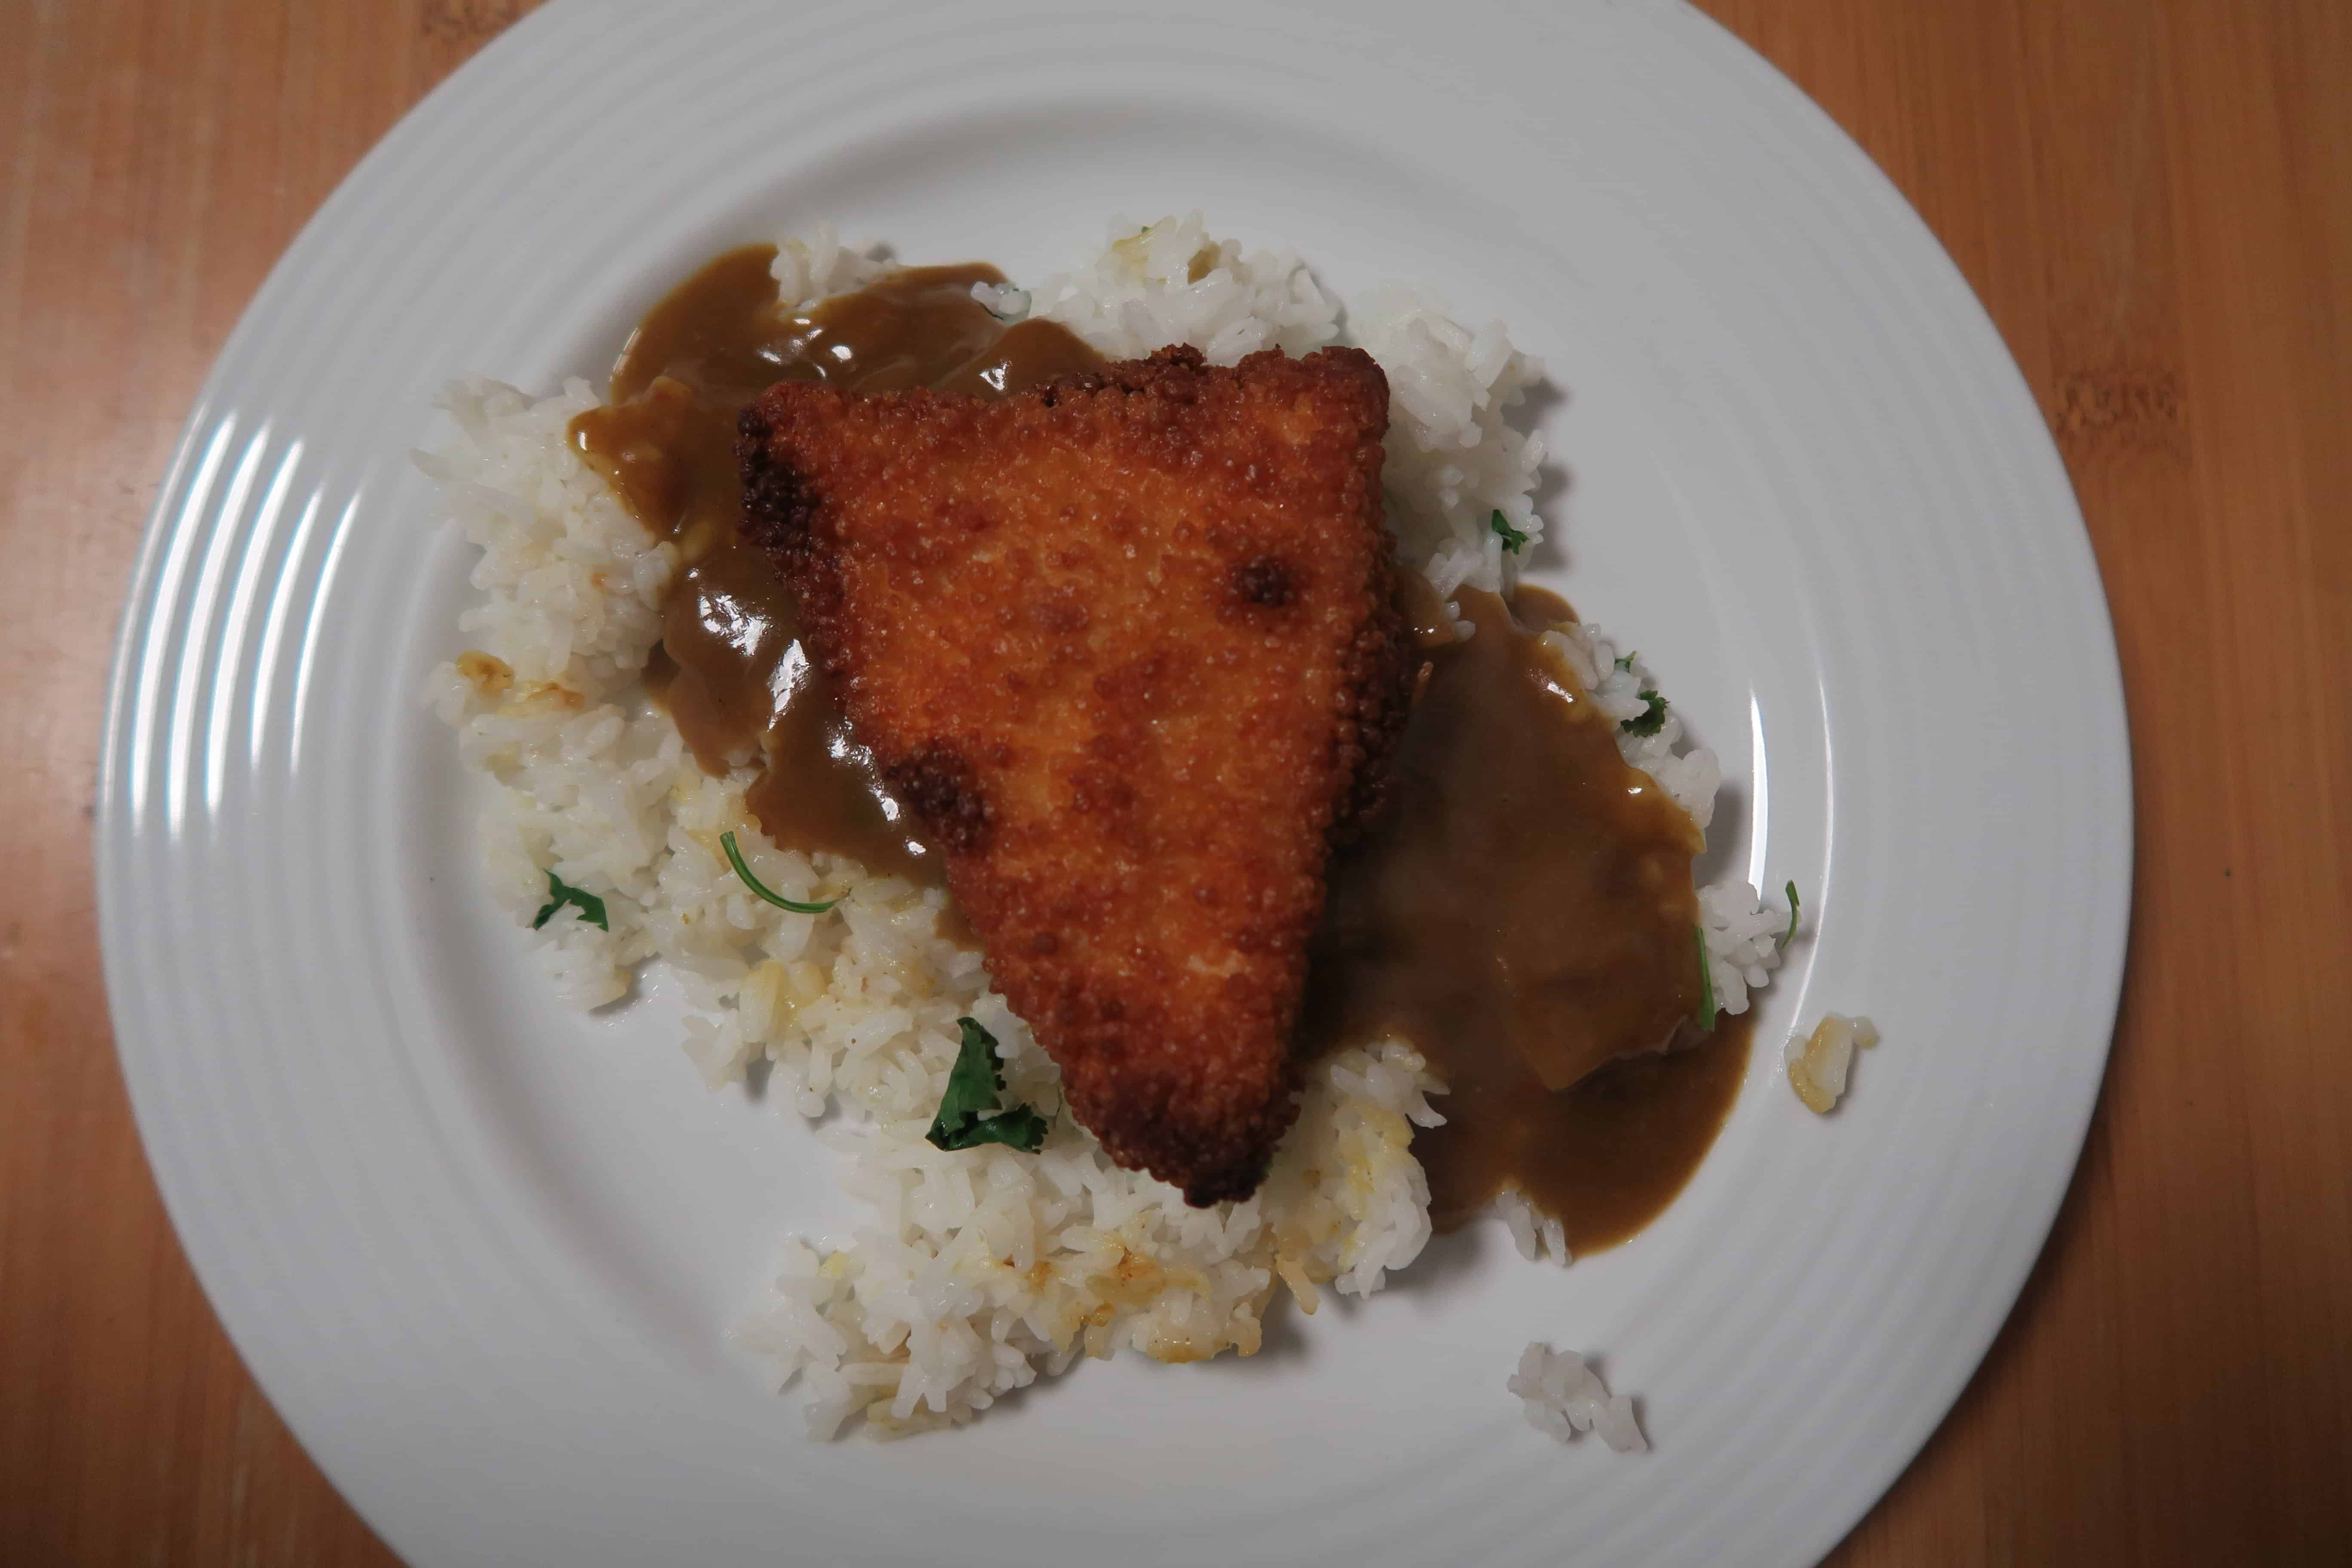 Tesco free from ready meal gluten free dairy free egg free katsu curry